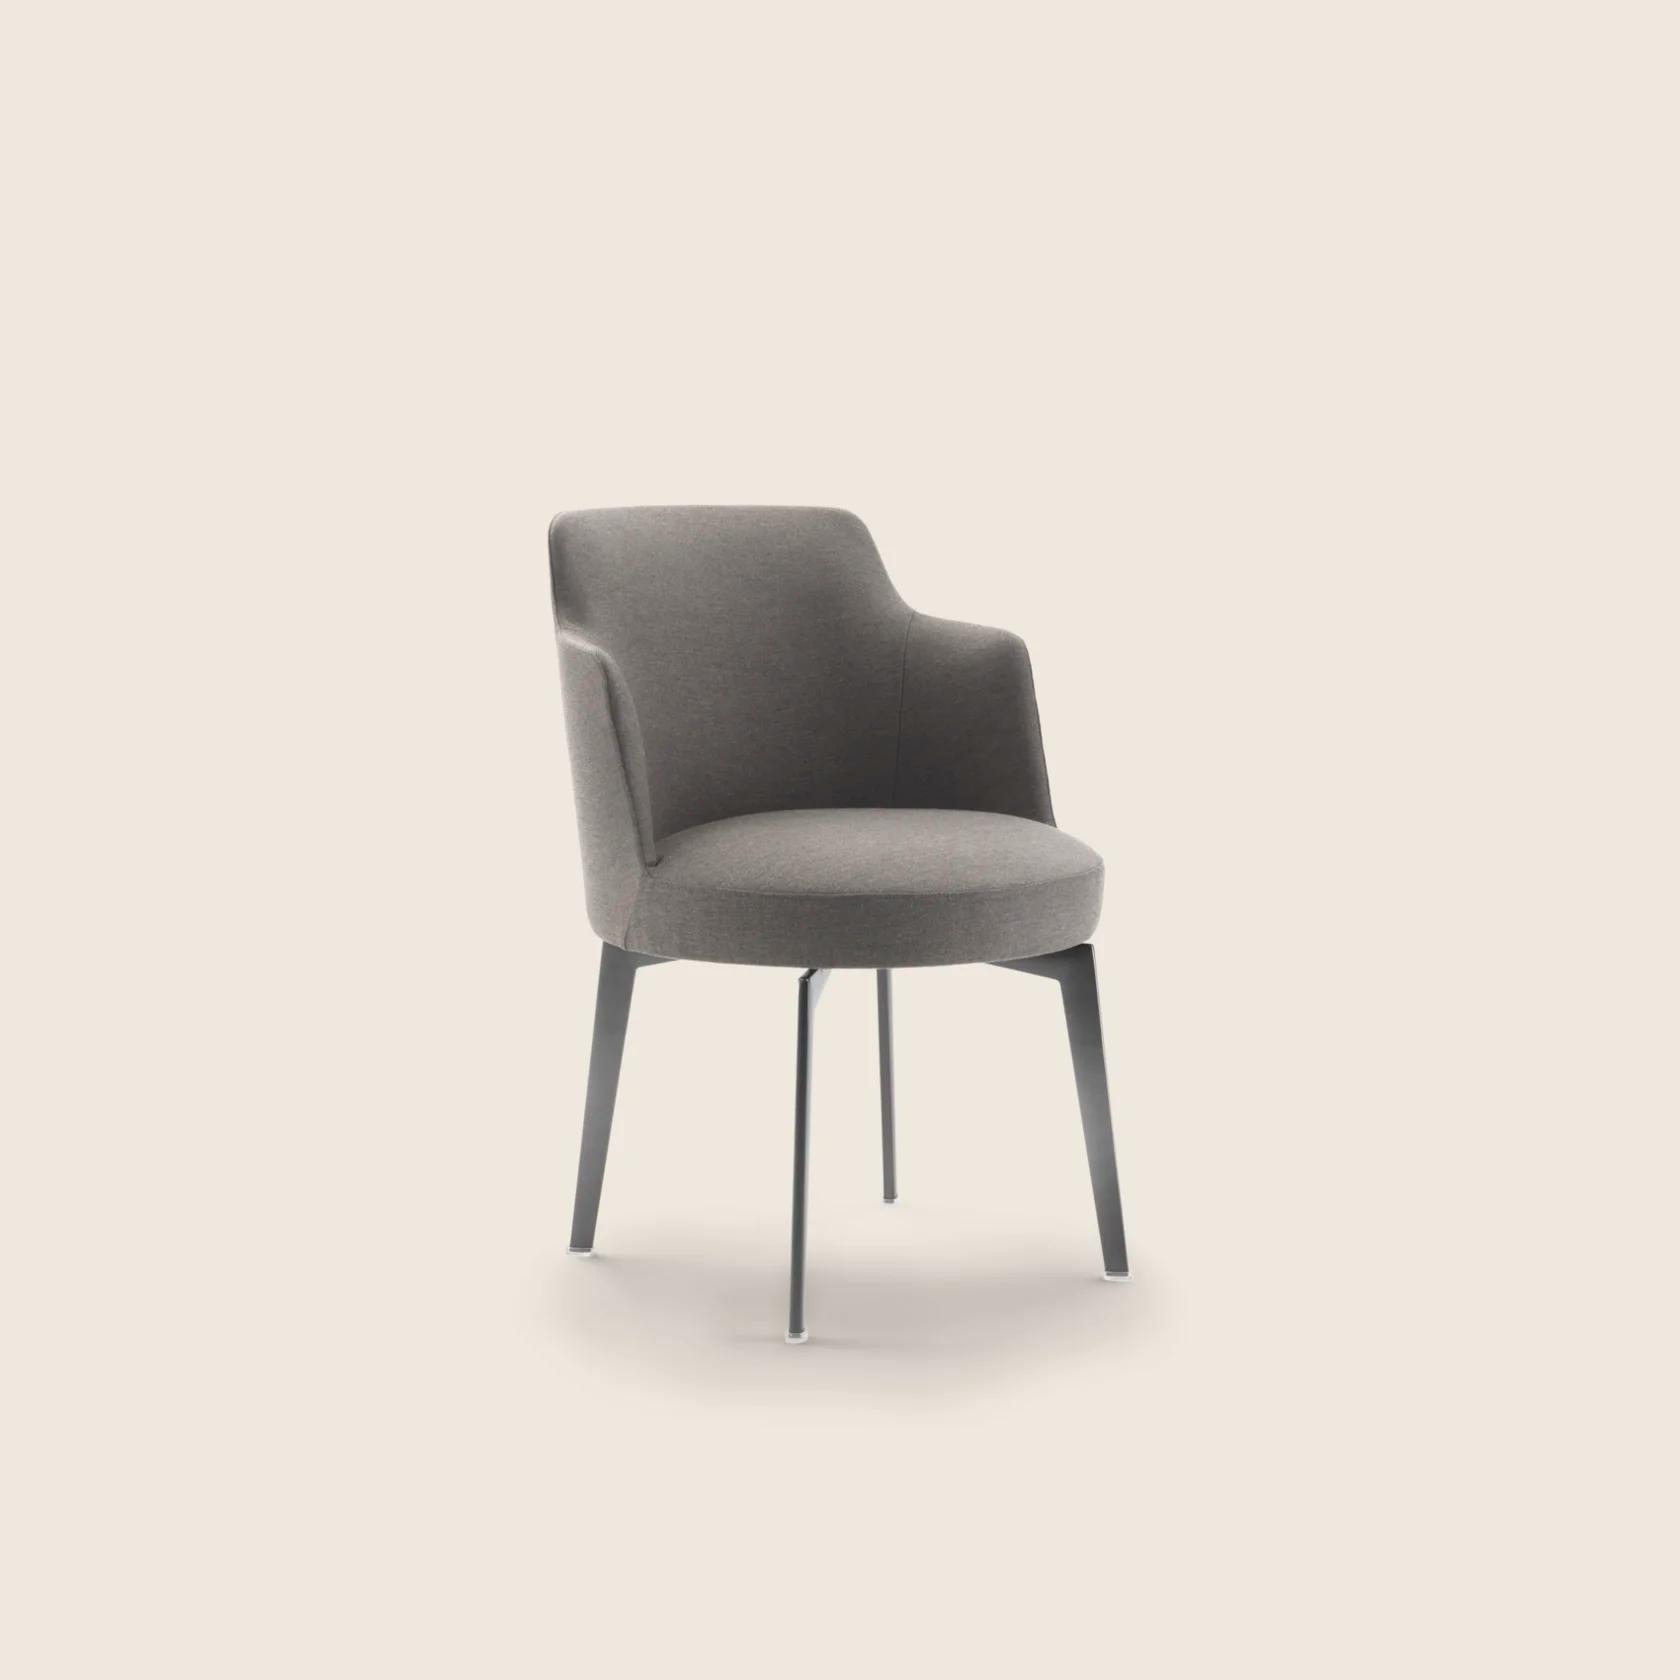 024601_HERA_CHAIR_01.png